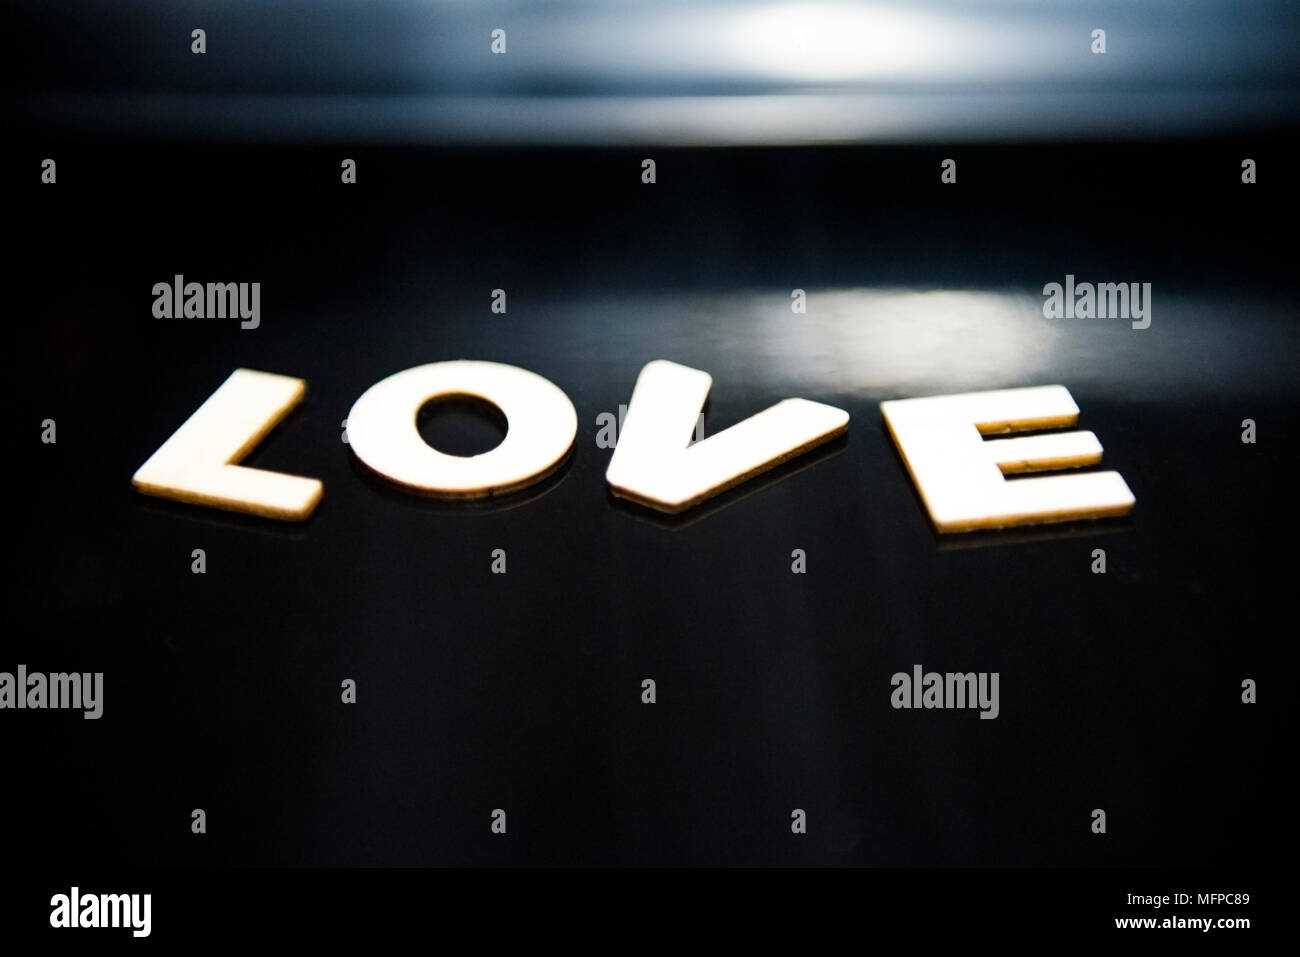 One of the most beautiful words in the world... Love... Stock Photo